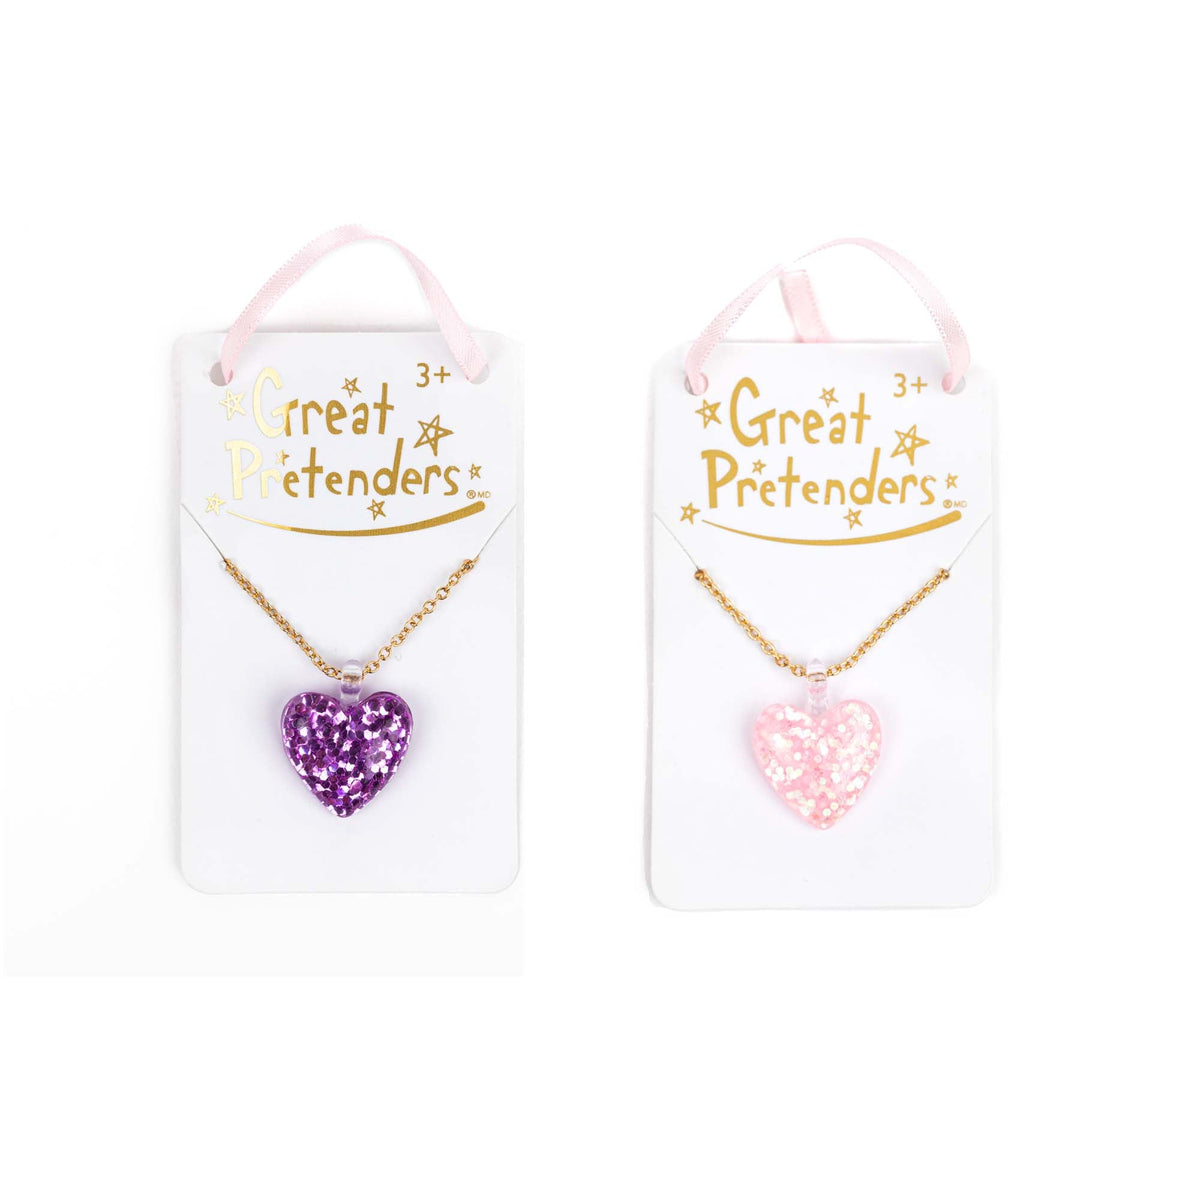 Great Pretenders Impulse Buying Boutique Glitter Heart Necklace for kids, assorted, 1 Count